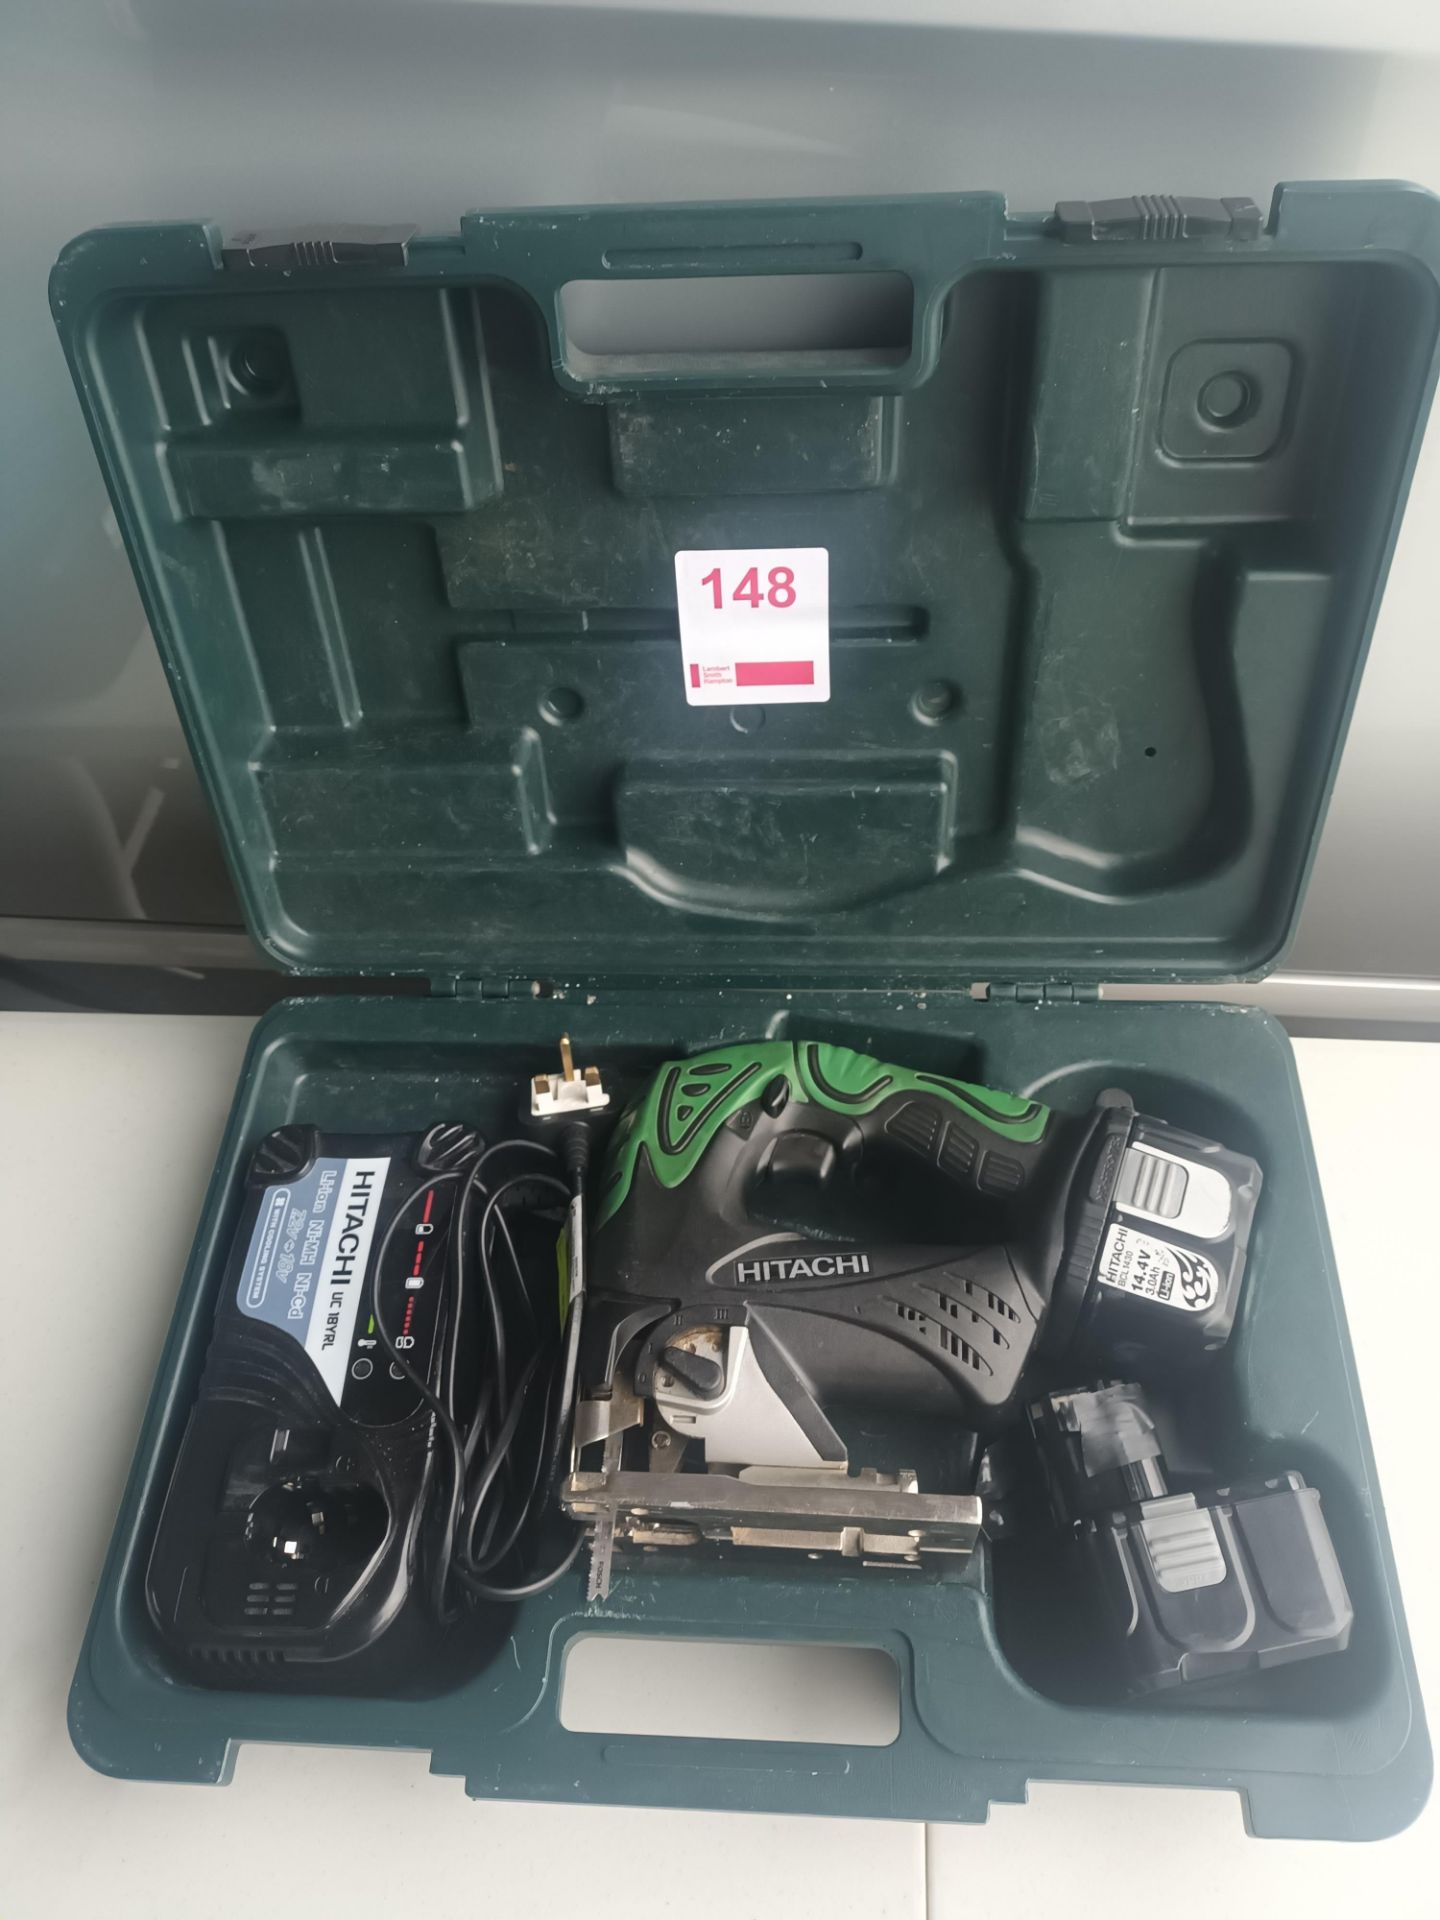 Hitatchi CJ14DL 14.4v Jigsaw with spare battery and charger (Located Upminster)